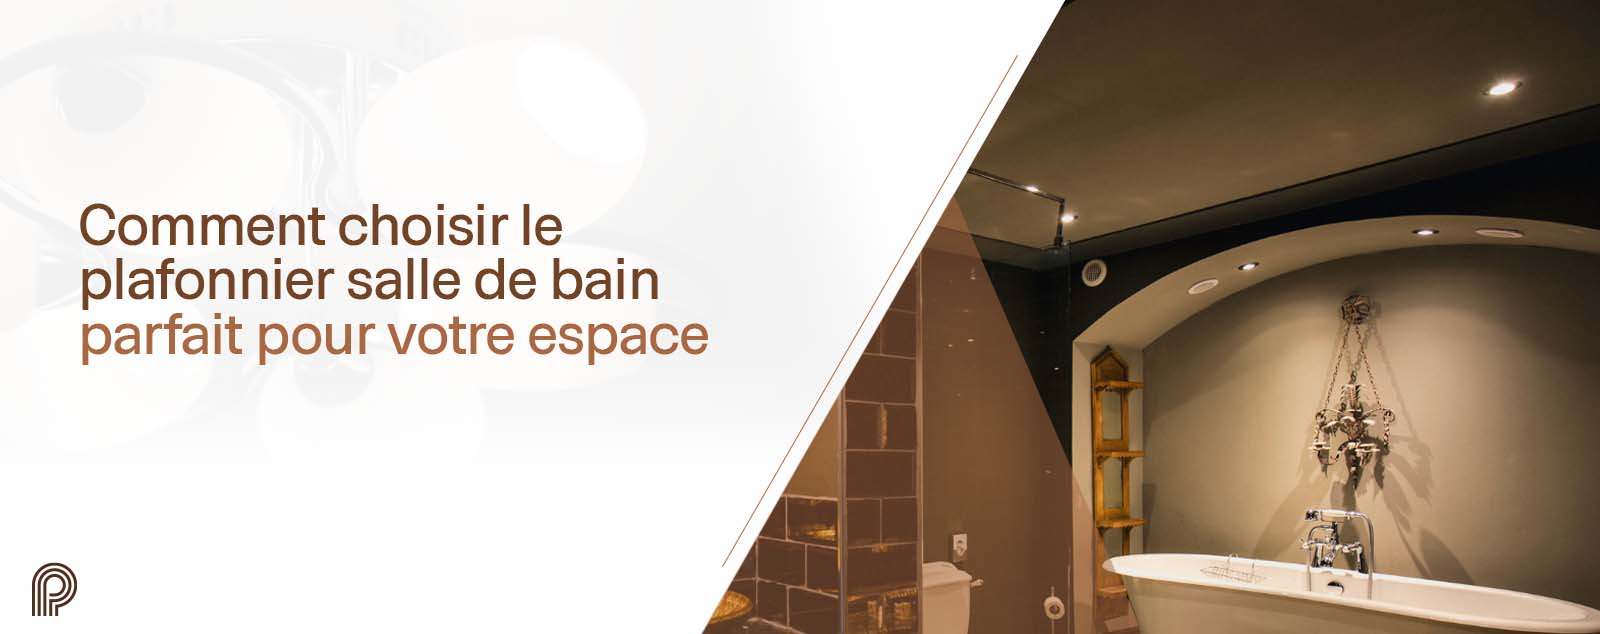 Bathroom ceiling light: how to choose, install and maintain this special fixture? Uncategorized salle de bain 3